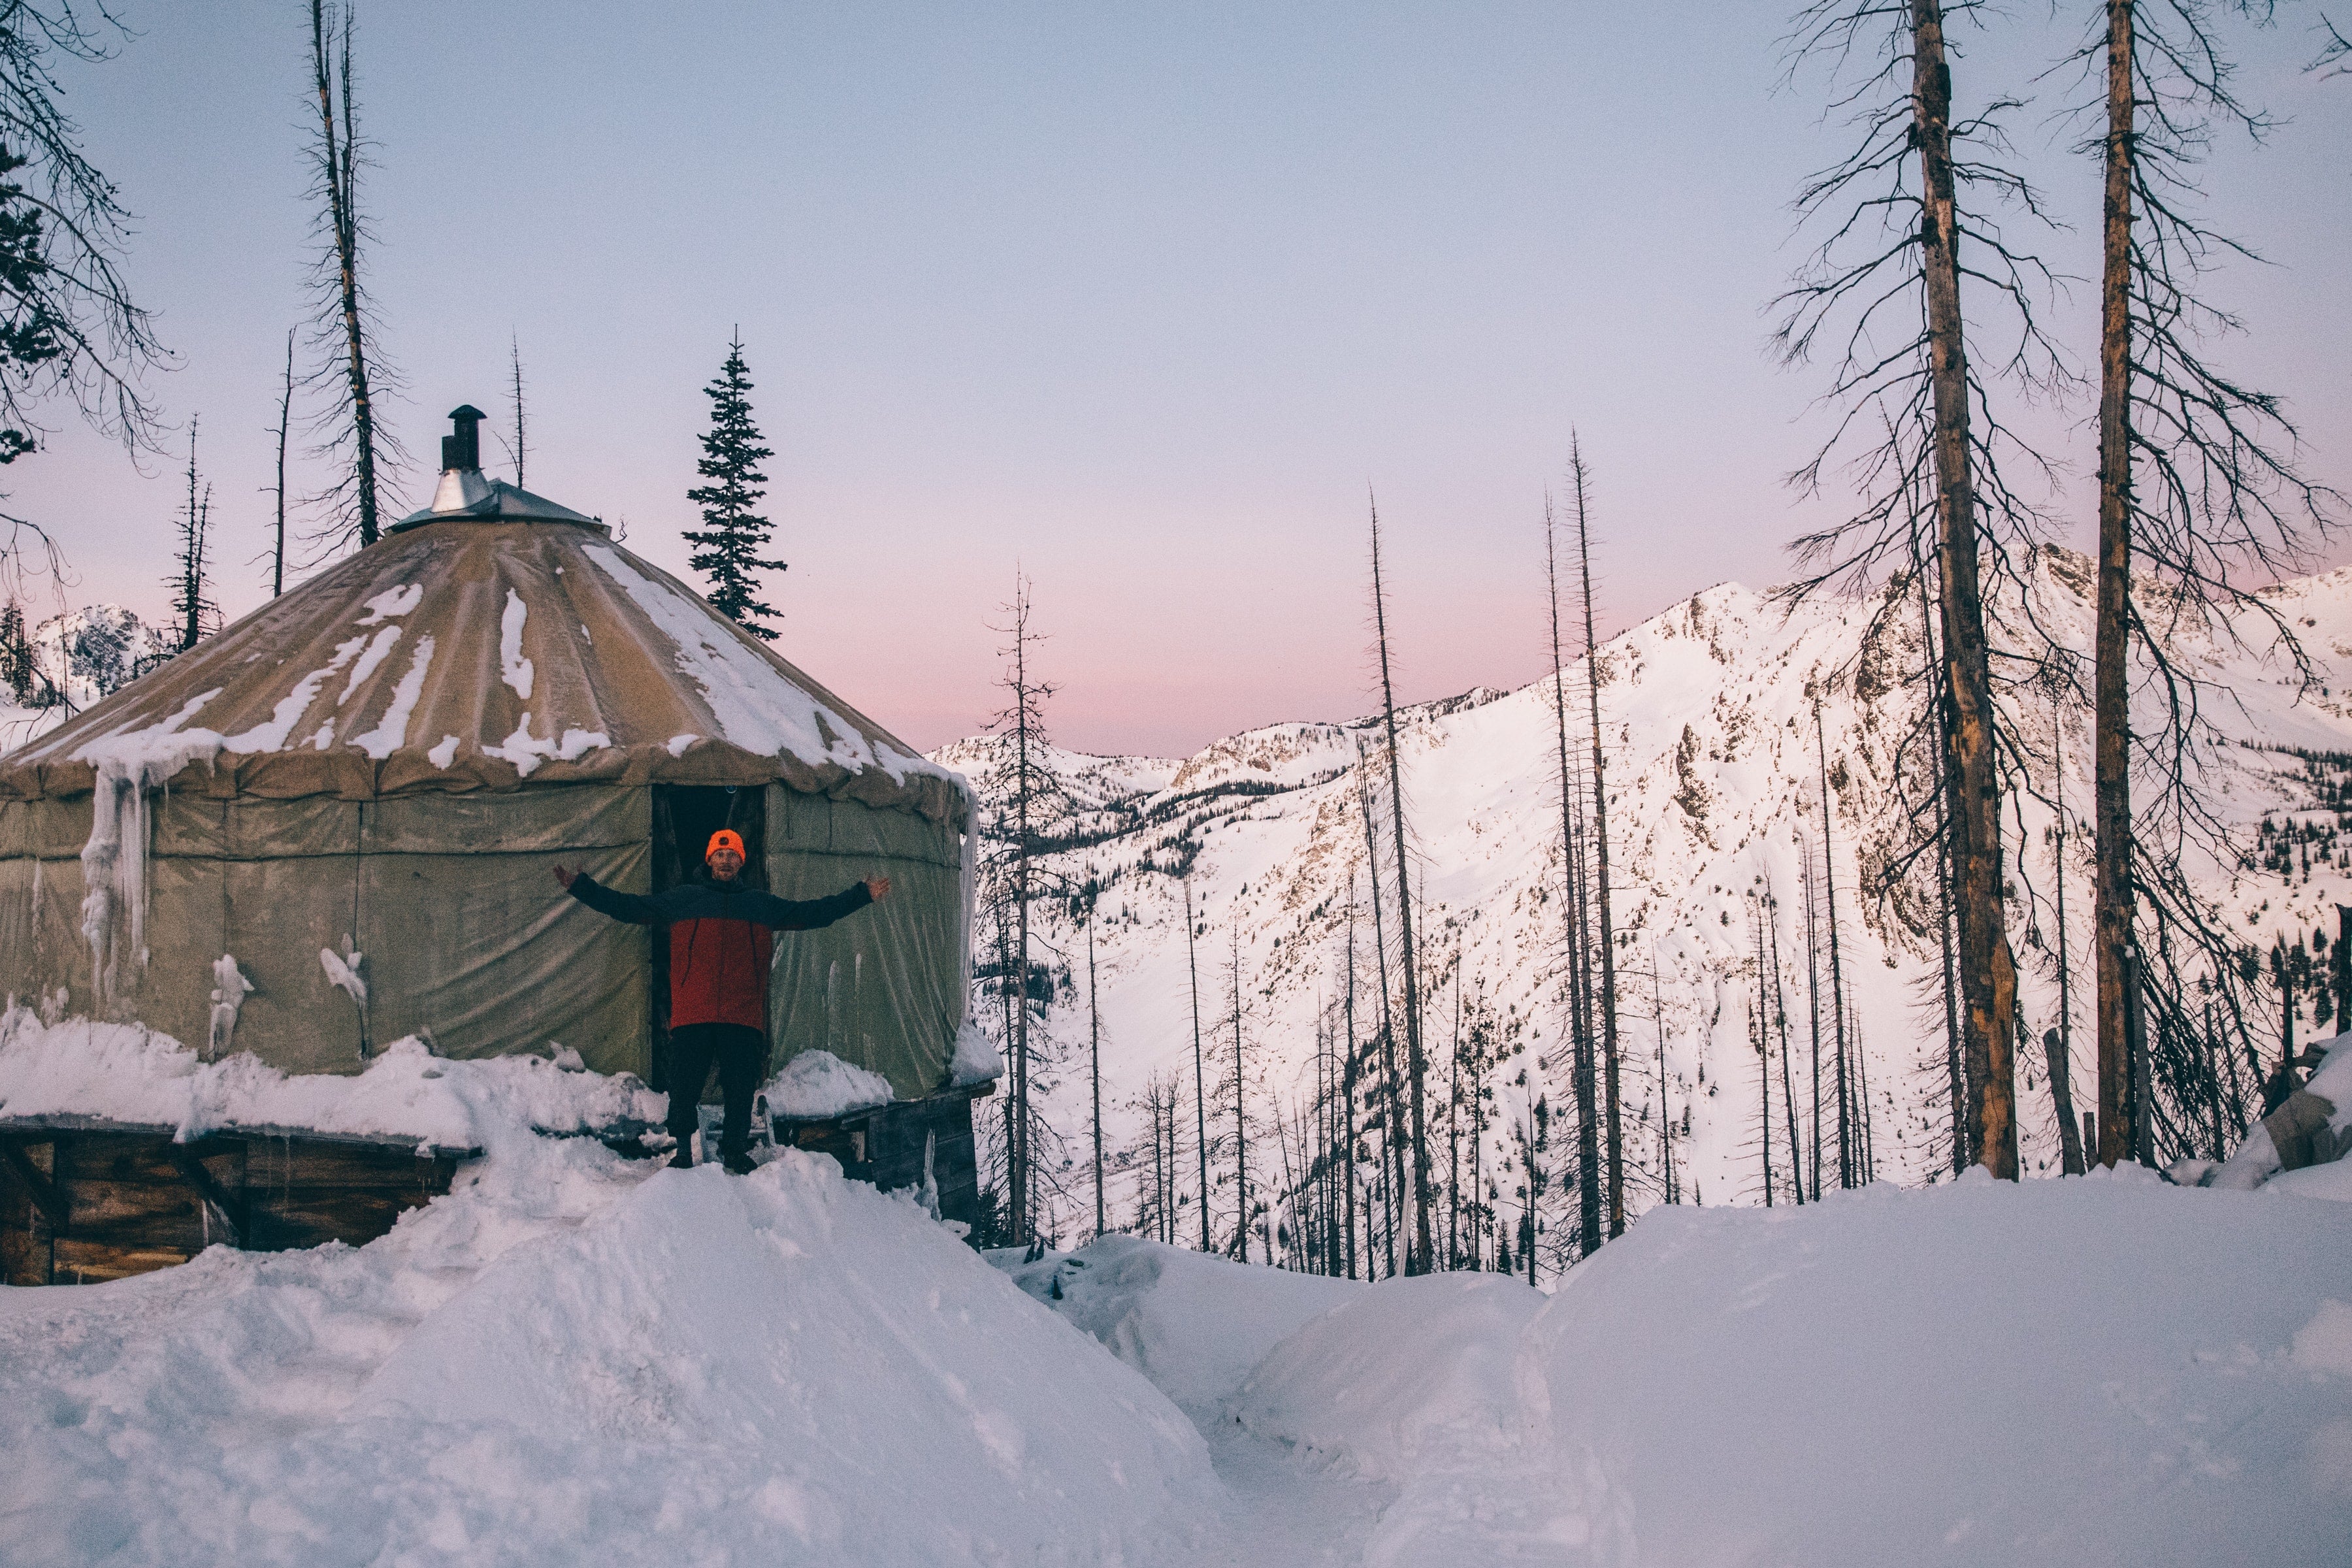 Seven Things To Pack For Your Next Backcountry Yurt Trip